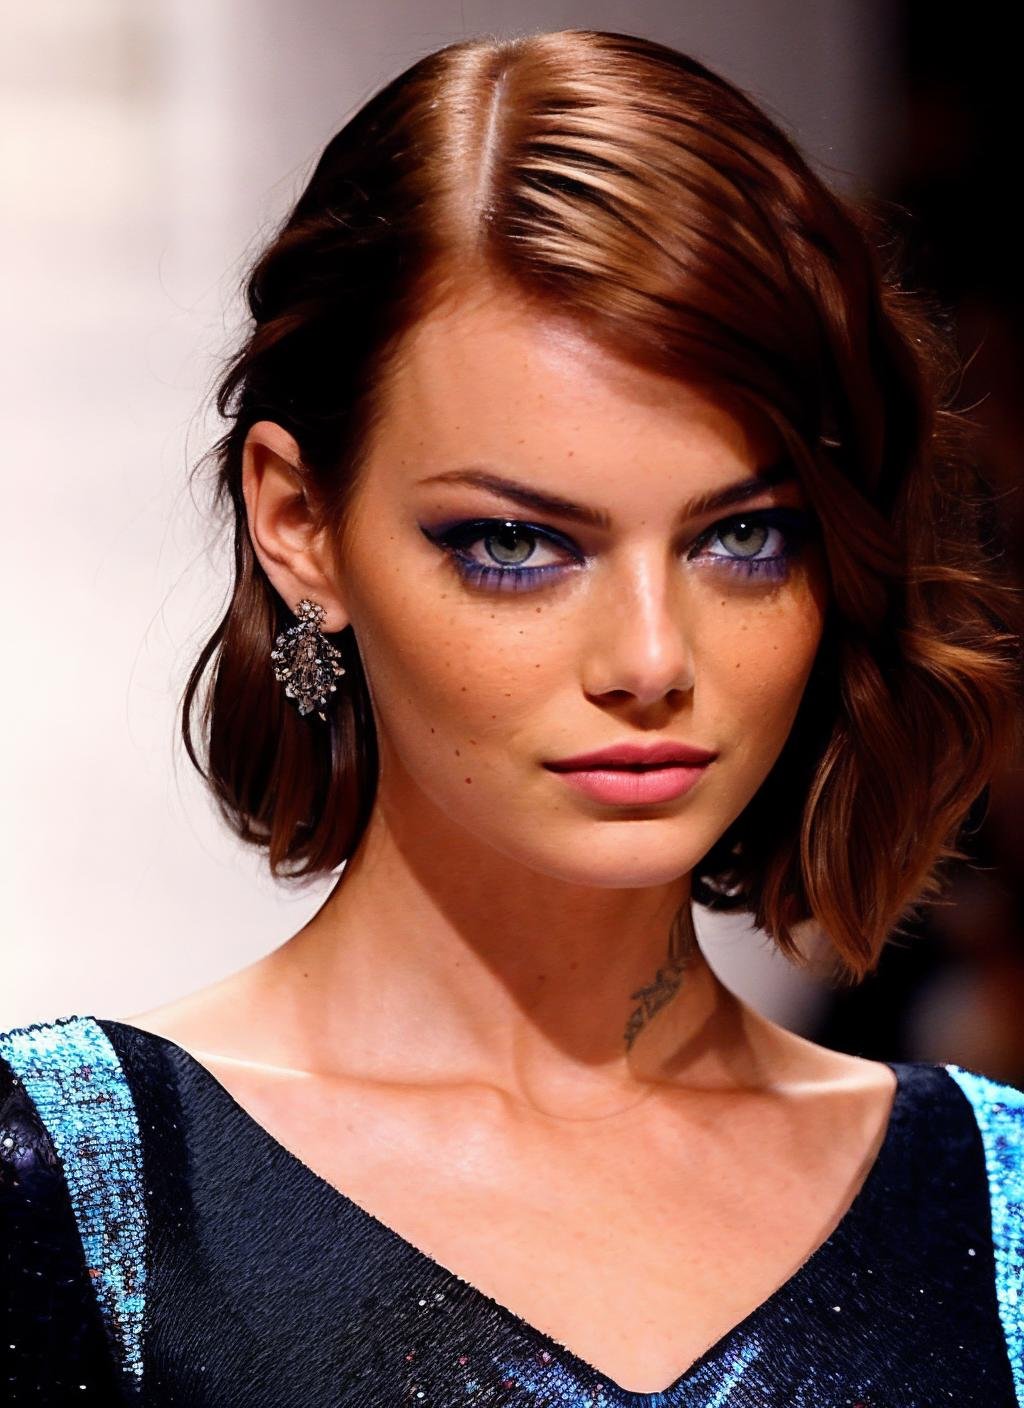 modelshoot style, raw photo of a supermodel sks woman wearing shimmering clothes walking on the ramp at milan fashion show, tattoos, 8k, intricate details, detailed face and eyes,(rendered eyes) <lora:epiNoiseoffset_v2:1>, <lora:locon_emmastone_v1_from_v1_64_32:1.4>